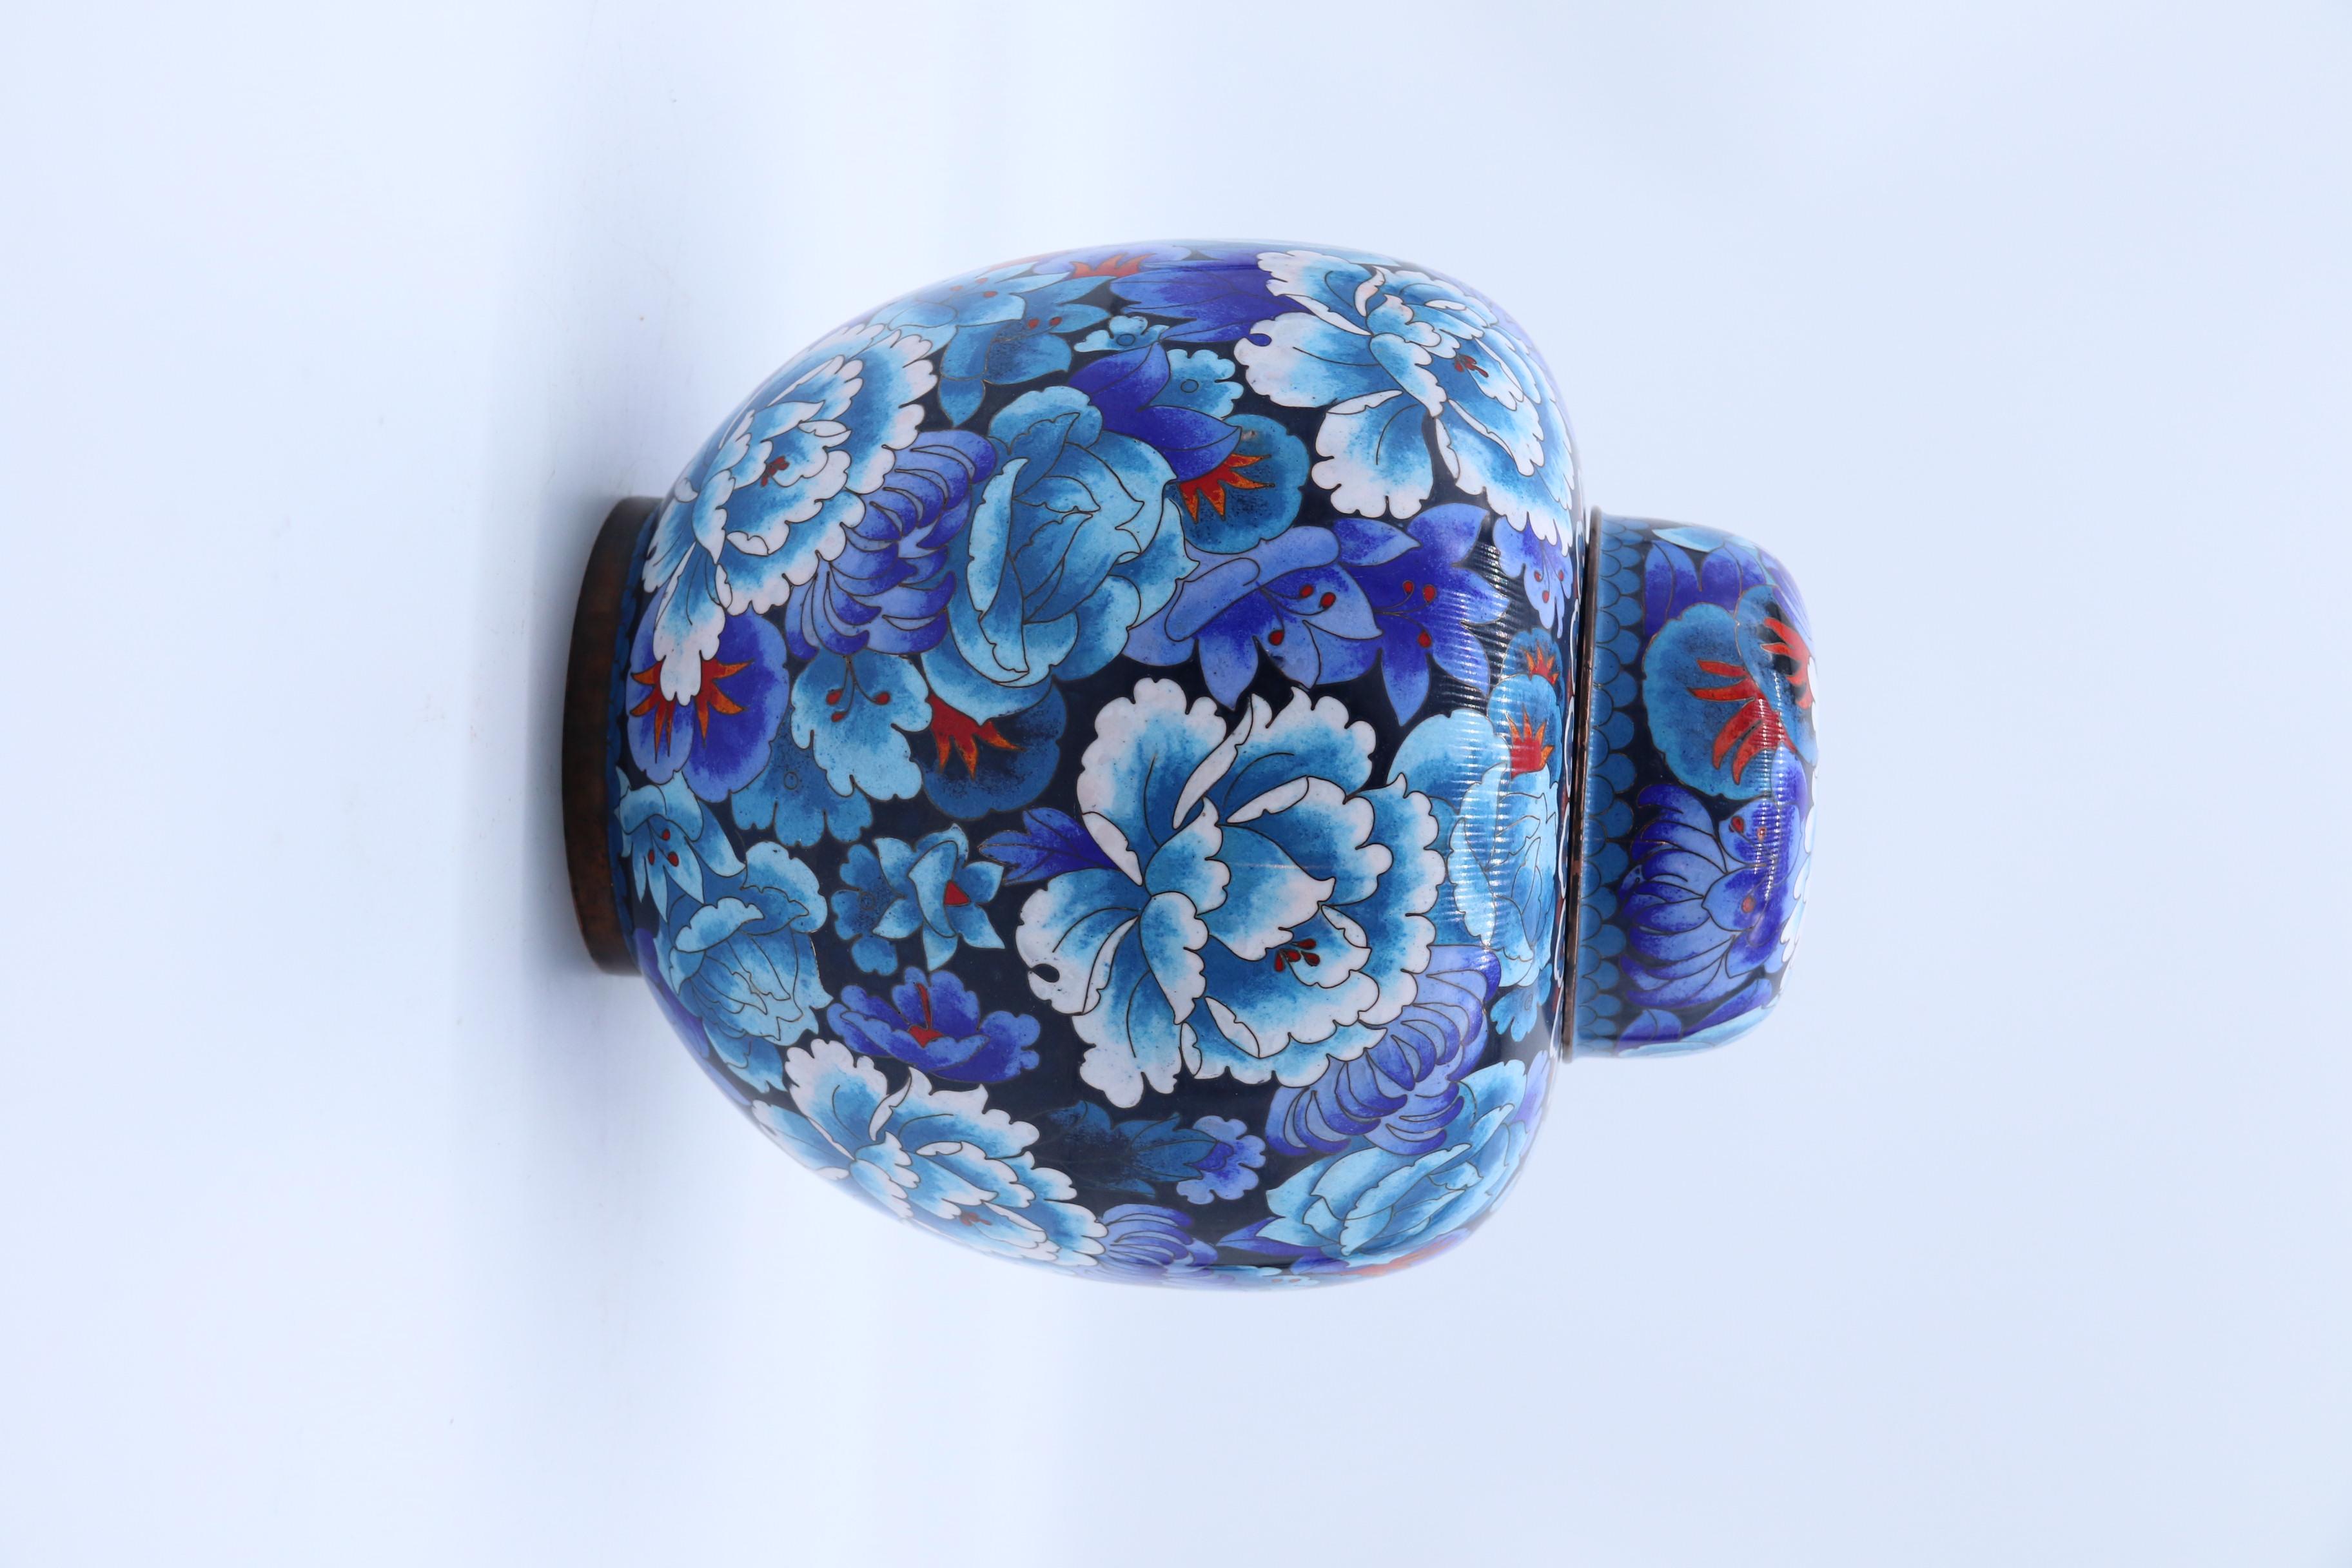 Cloissoné Chinese Large Cloisonné Ginger Jar Enamelled with Peonies, c 1930